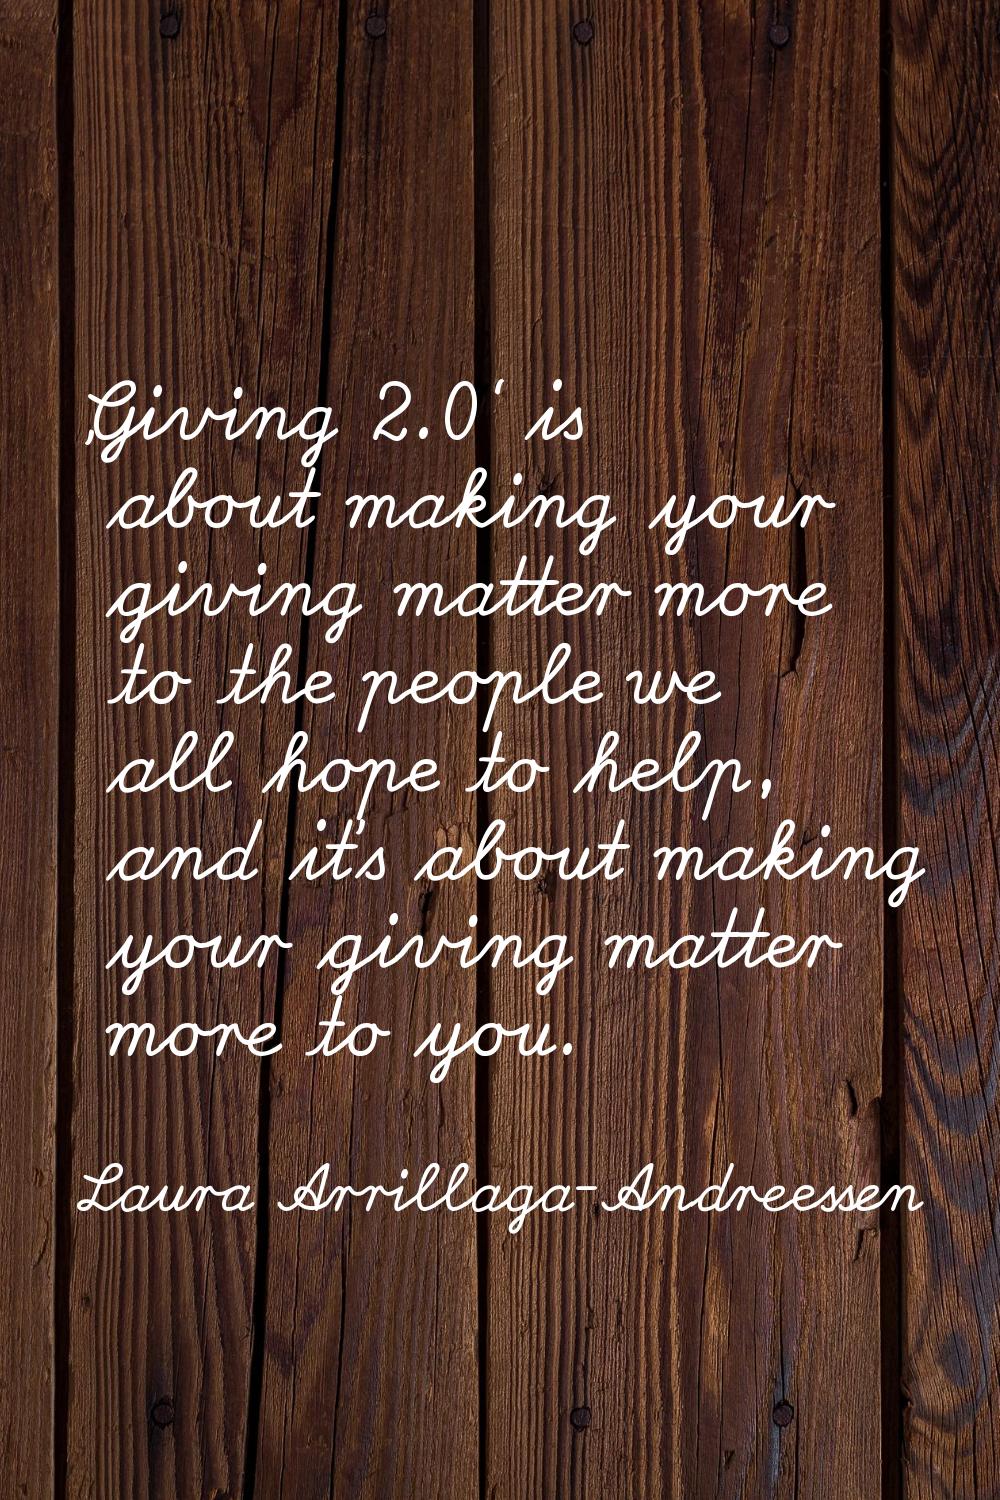 'Giving 2.0' is about making your giving matter more to the people we all hope to help, and it's ab